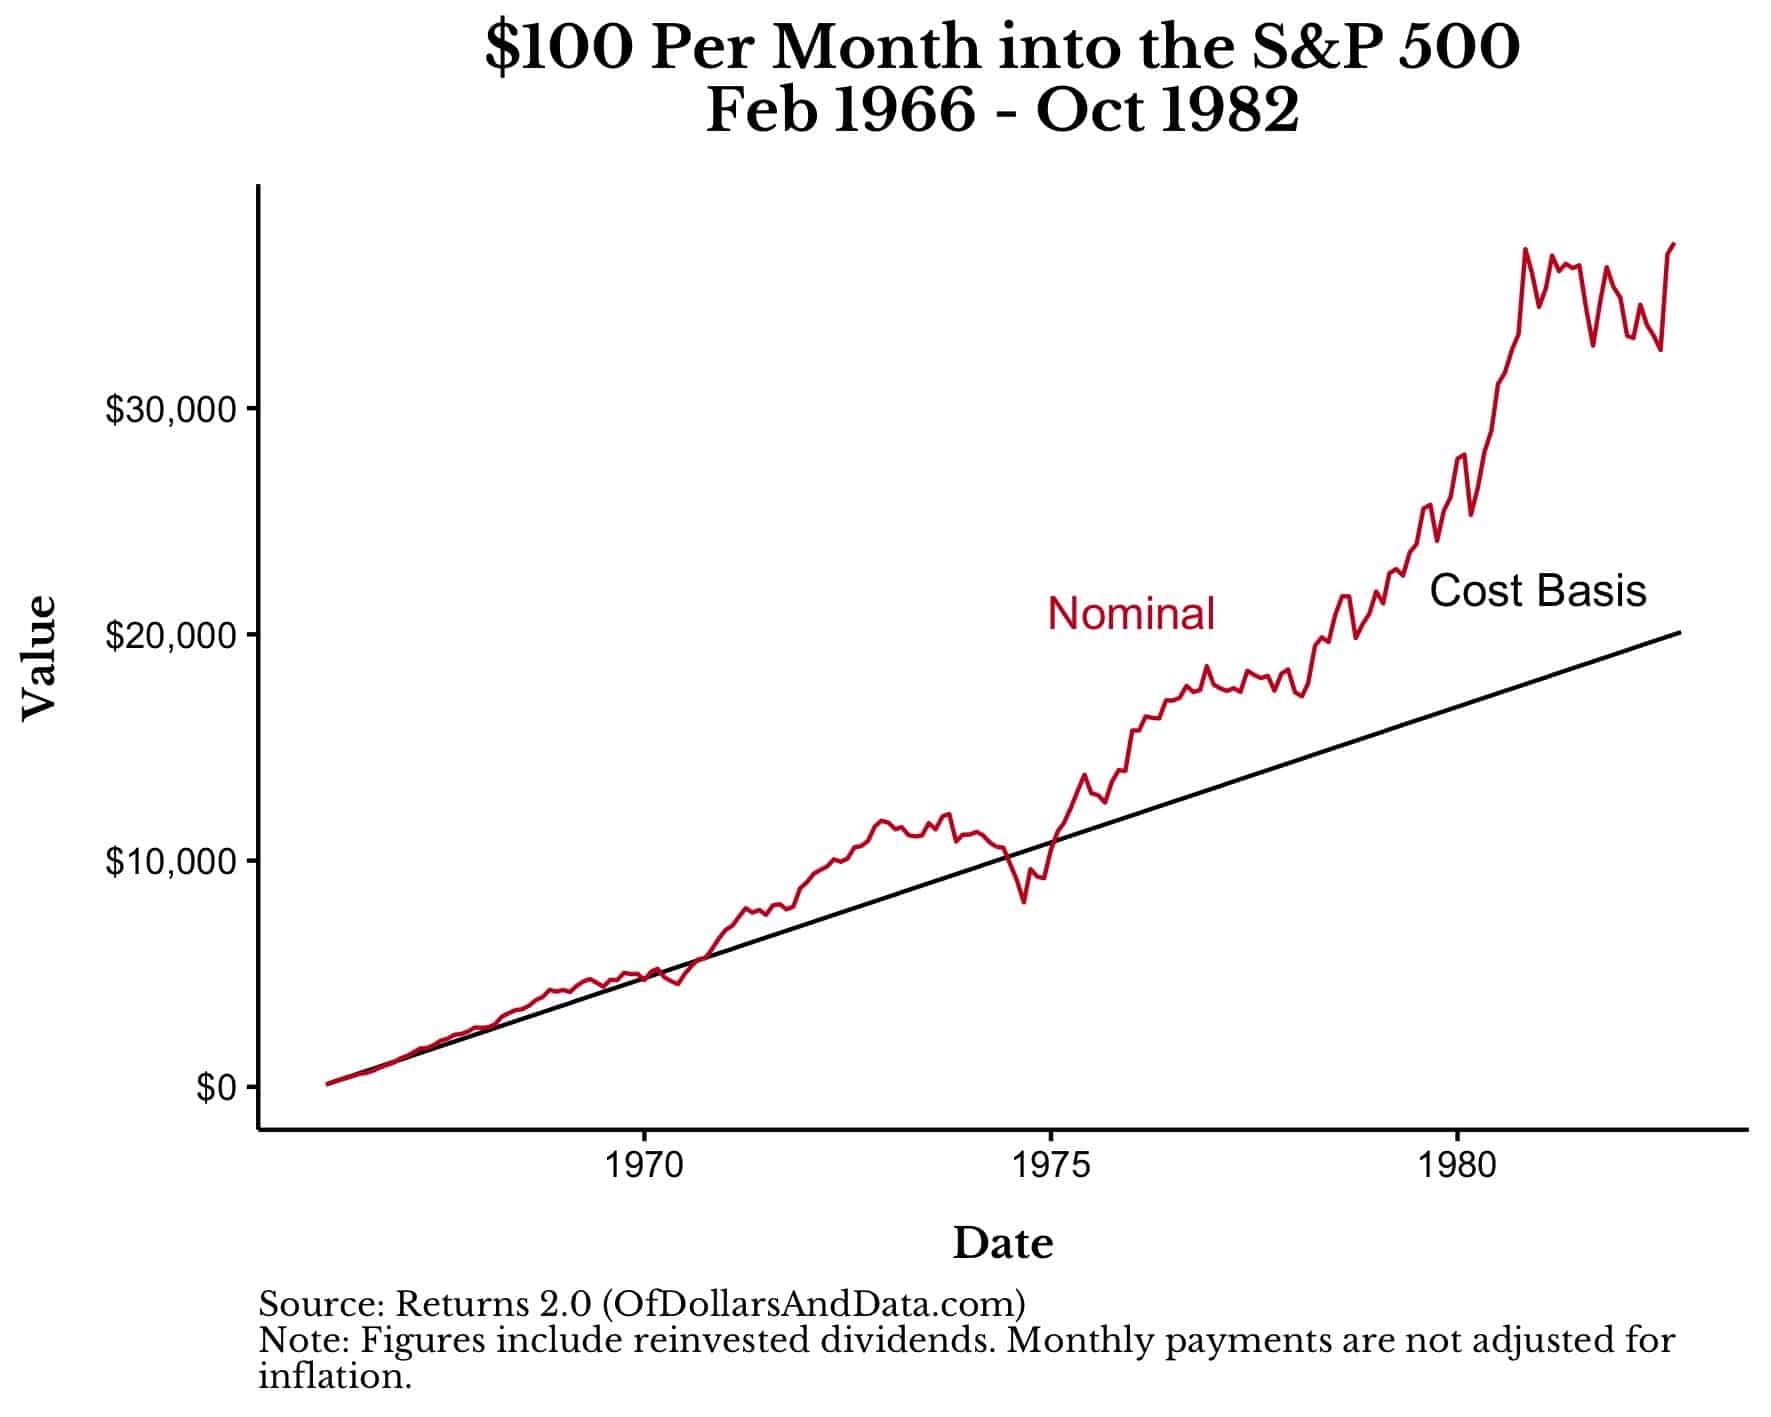 $100 month into the S&P 500 from Feb 1966 to Oct 1982, showing nominal dollars vs the cost basis